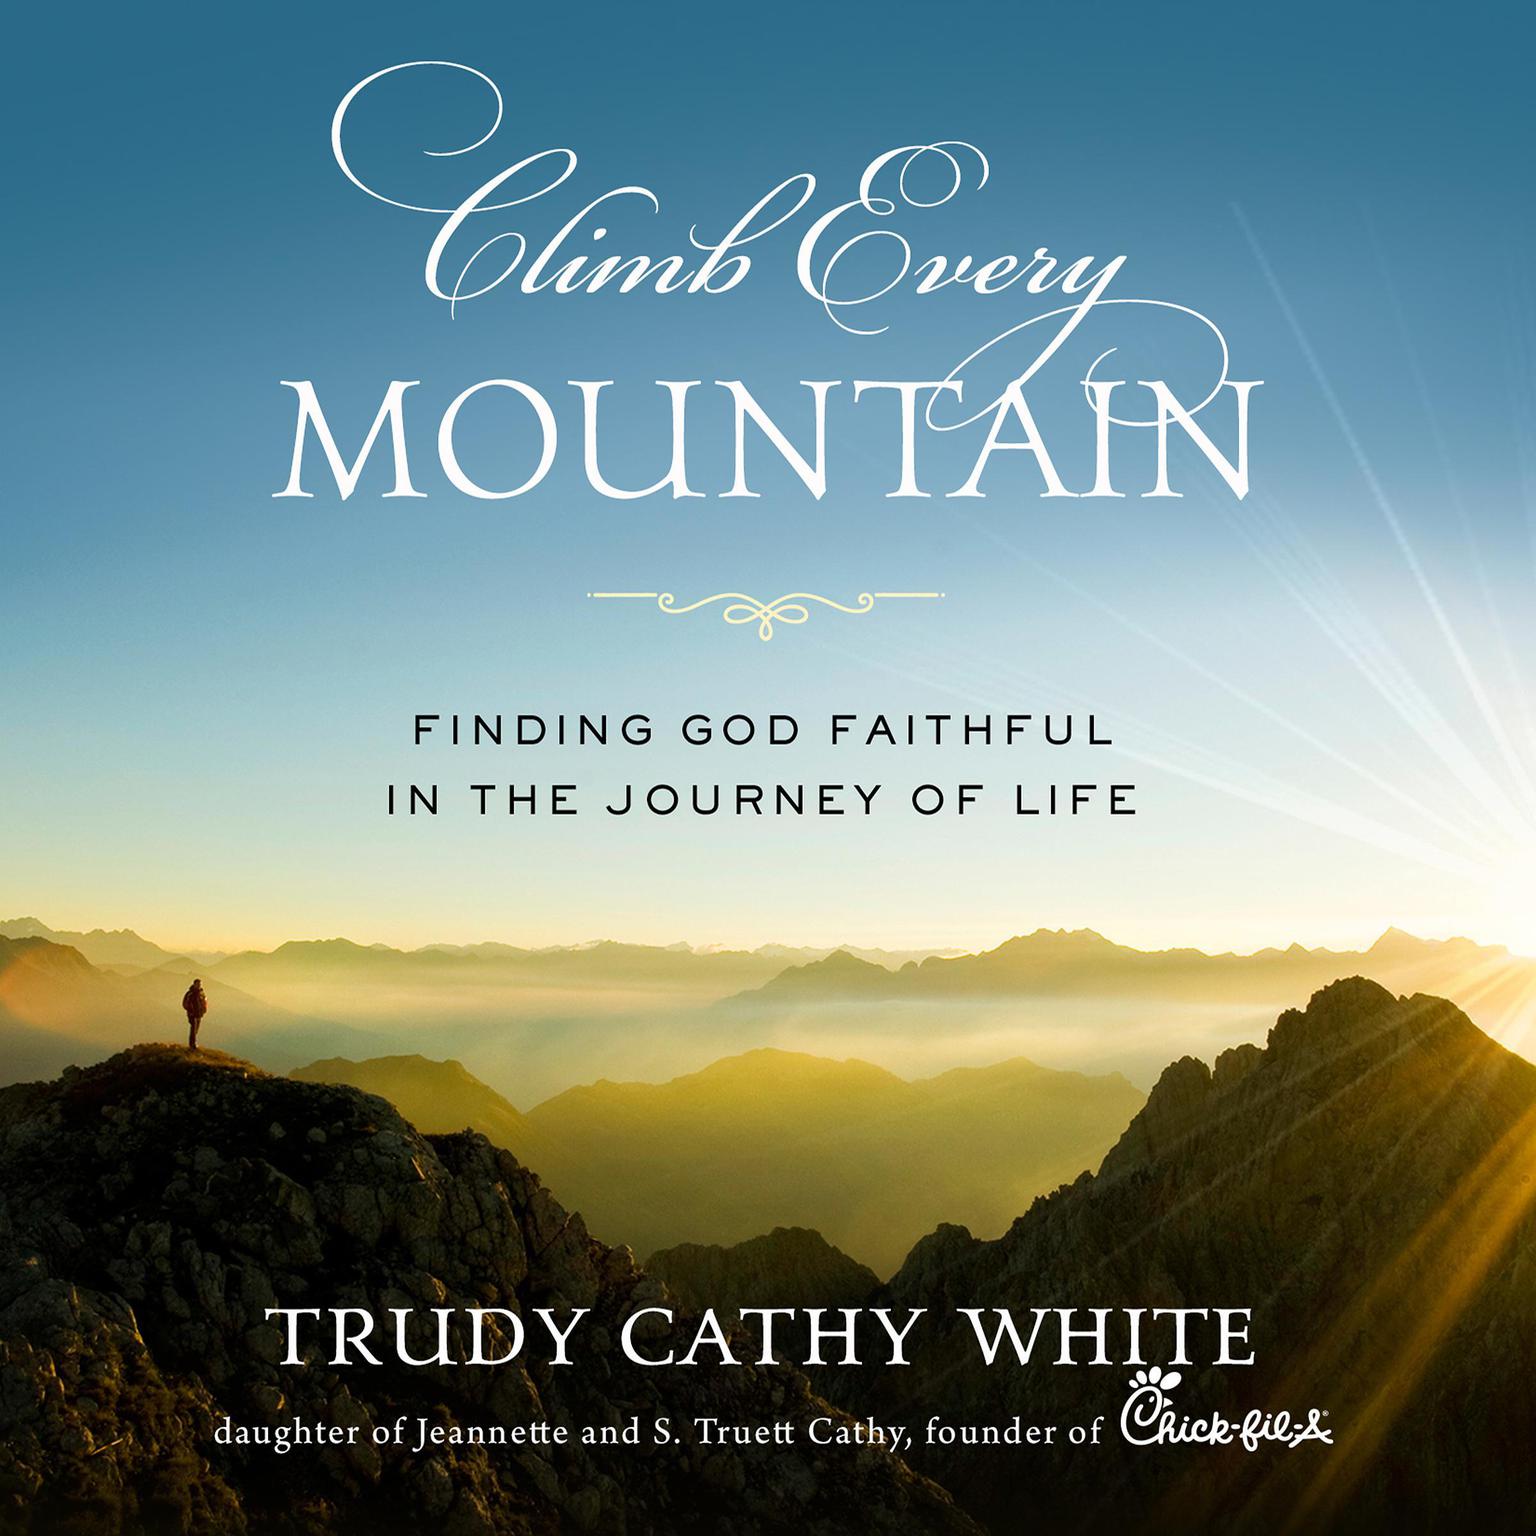 Climb Every Mountain: Finding God Faithful in the Journey of Life Audiobook, by Trudy Cathy White